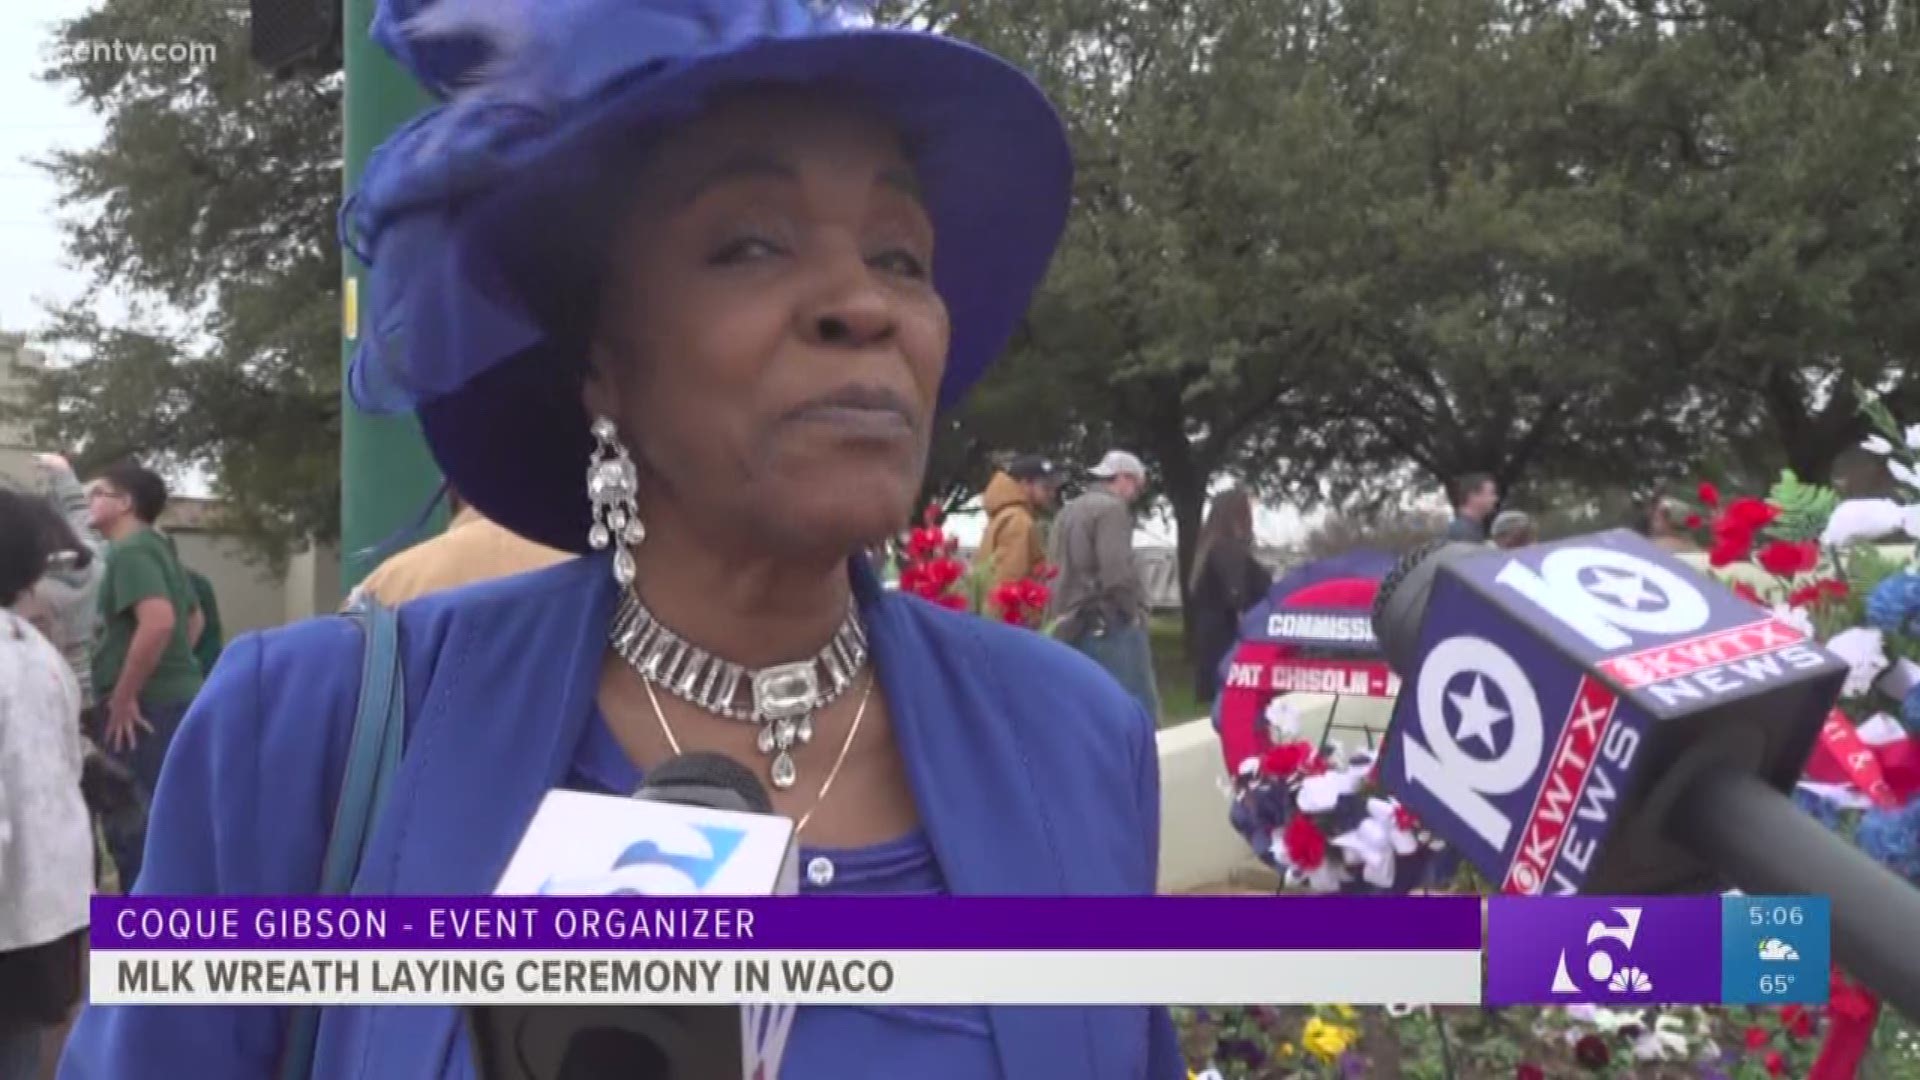 The ceremony is put on every year by former McLennan County Commissioner Lester Gibson and his wife who says the wreaths are a reminder of who MLK was.